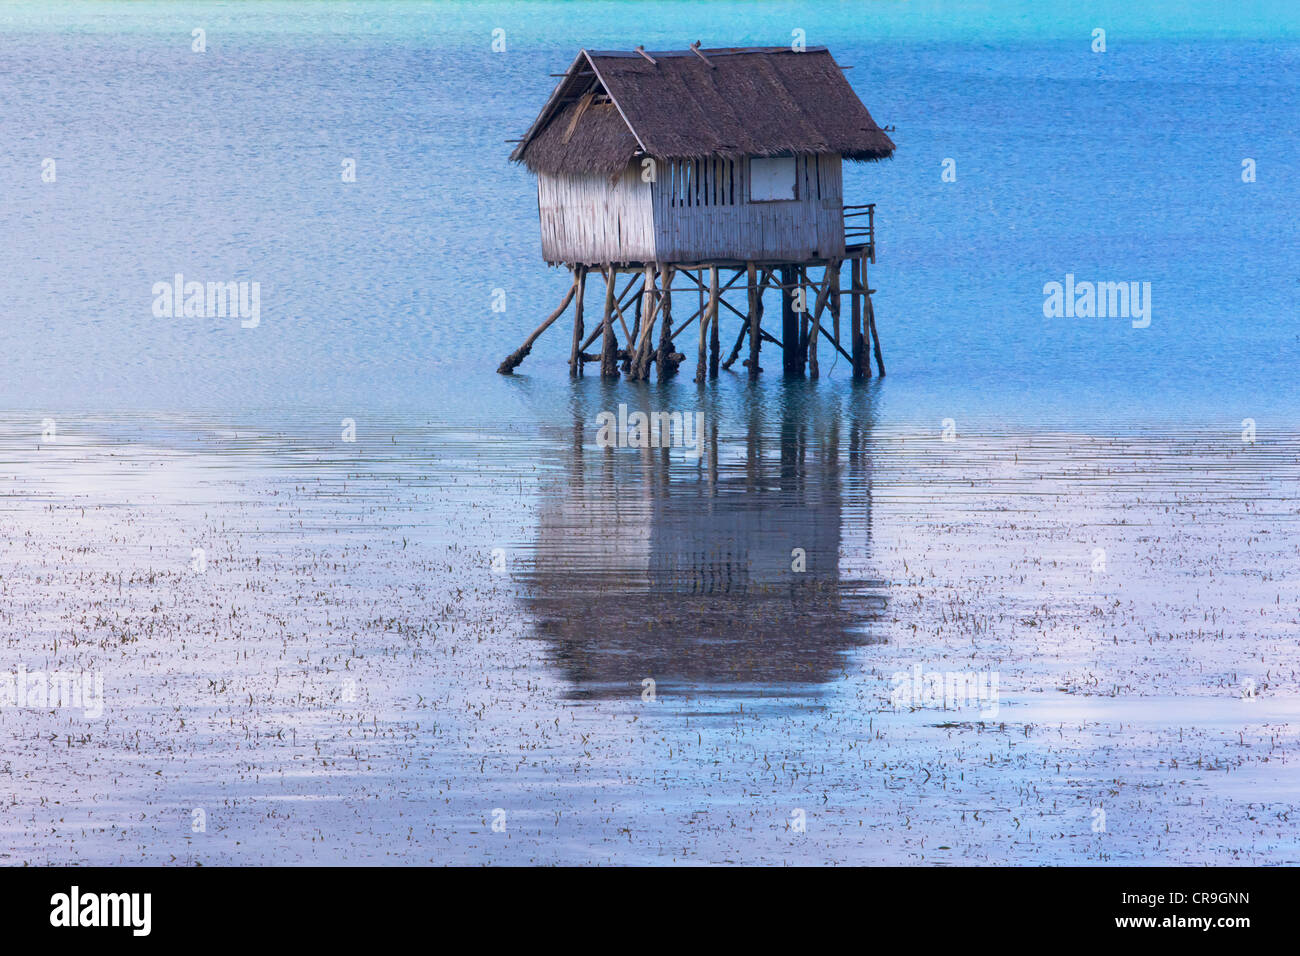 A small fishing house in the water, Bohol Island, Philippines Stock Photo